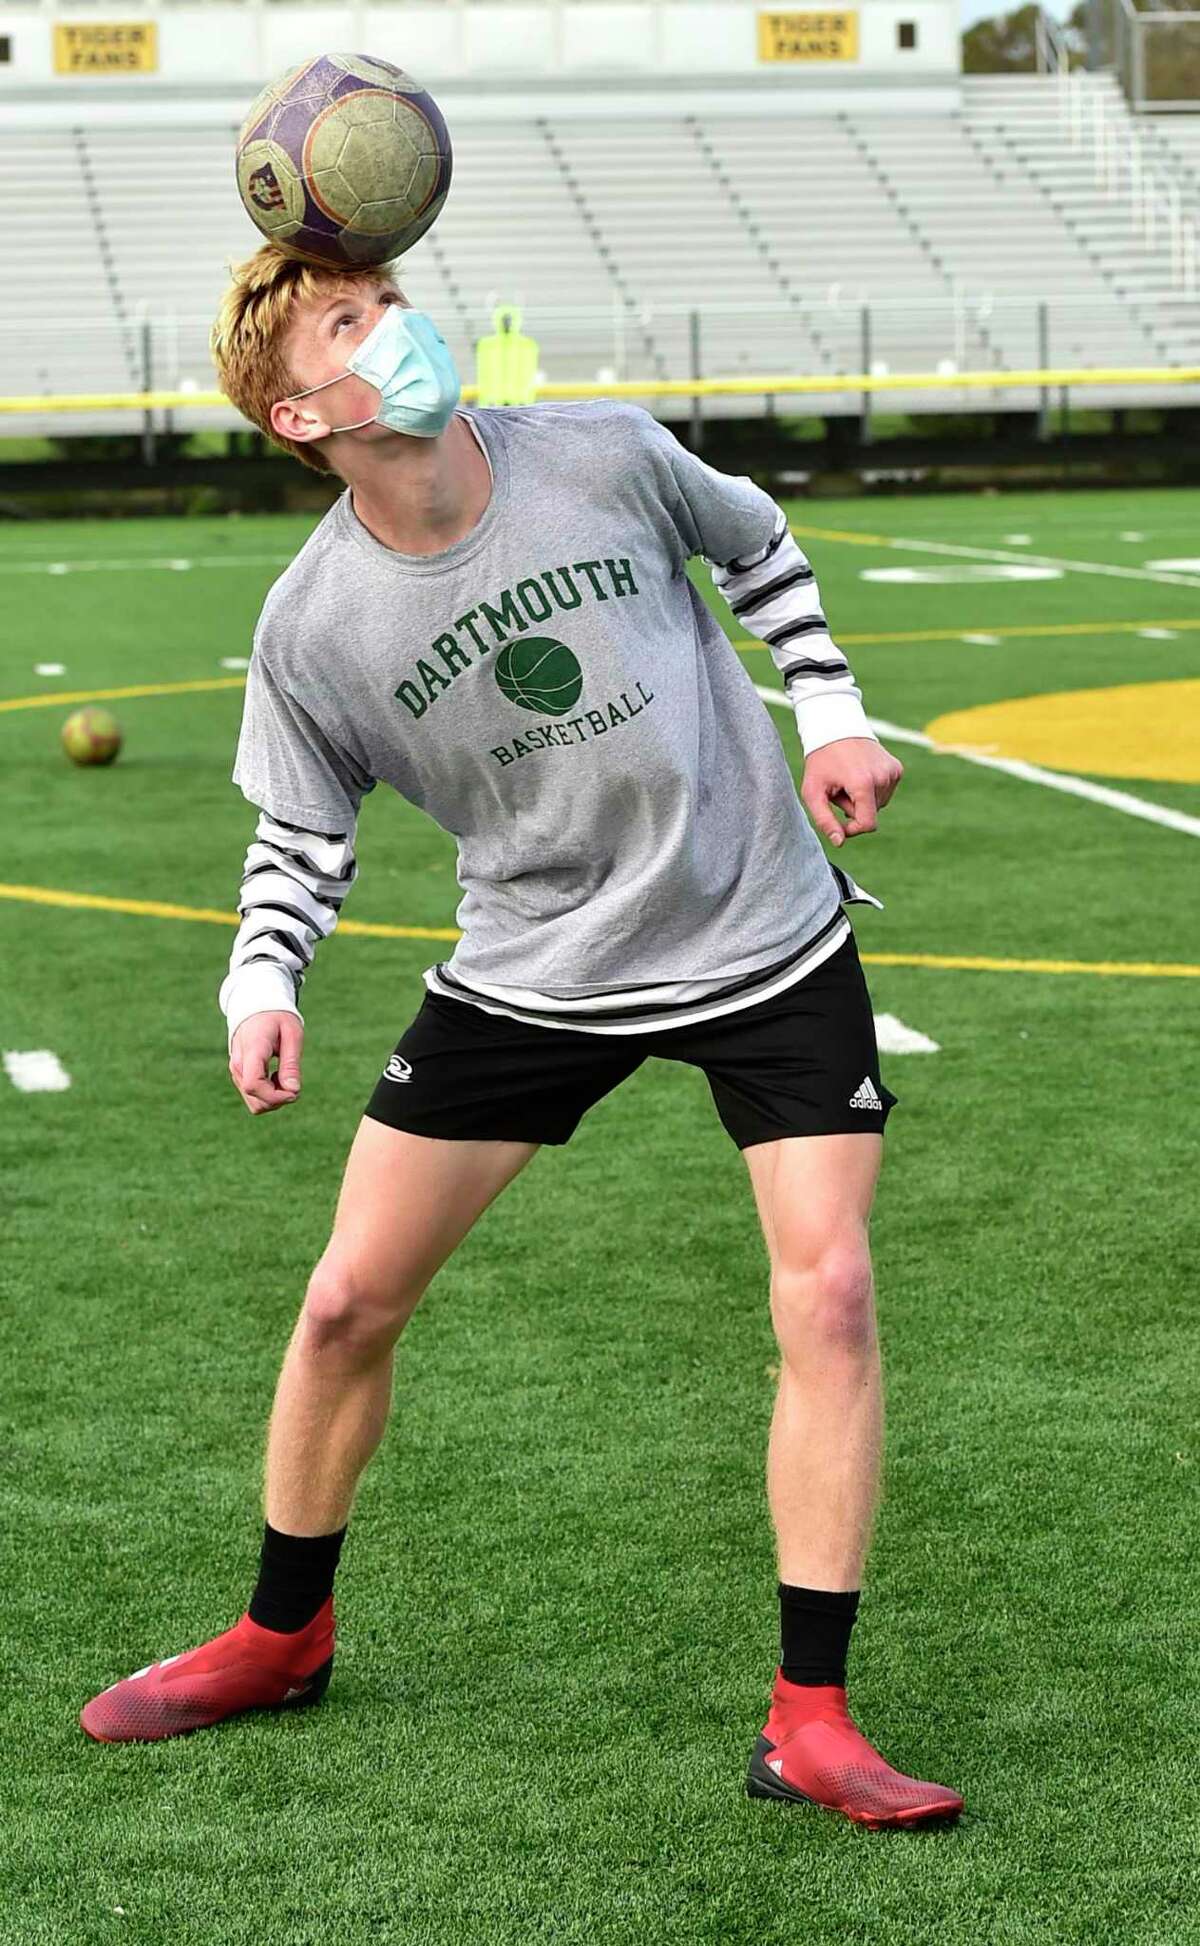 Hand’s Scott Testori was named the Connecticut Sports Writers' Alliance Male Athlete of the Year.